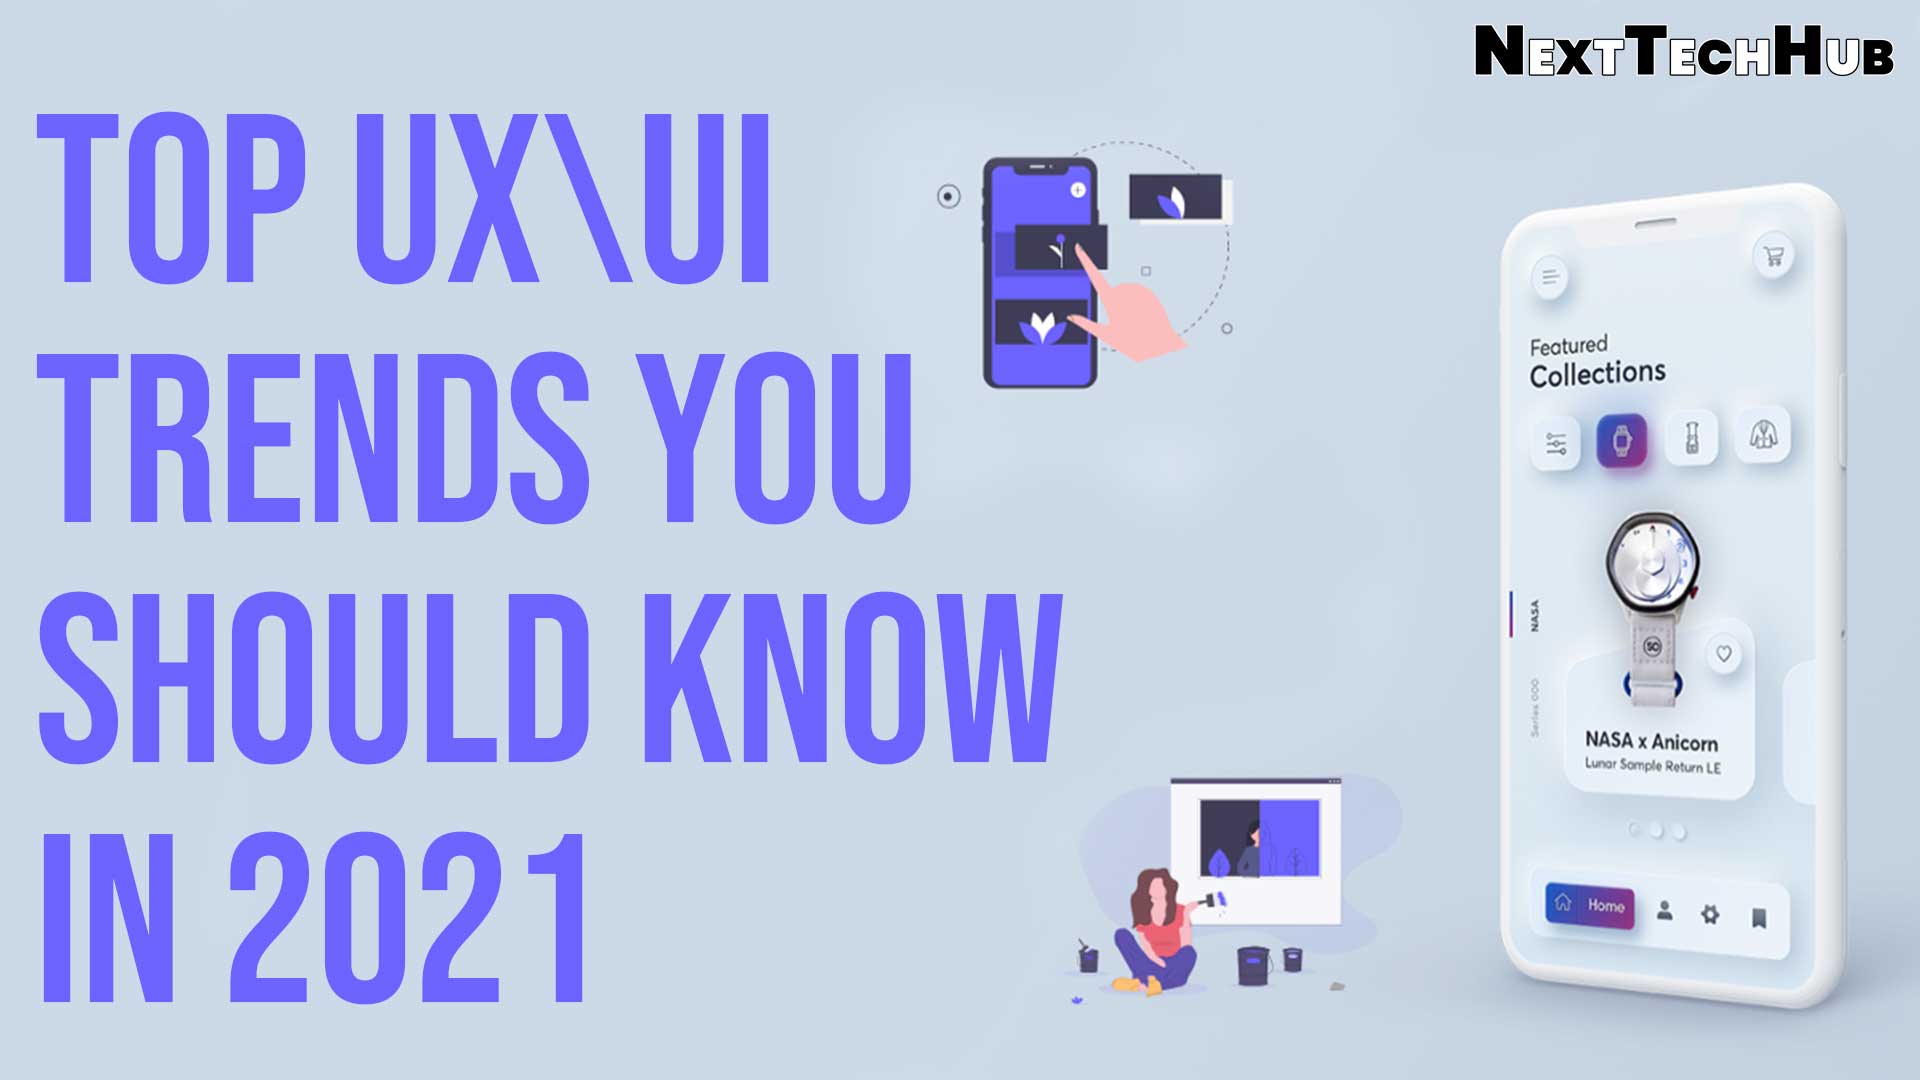 Top UX UI Trends You Should Know In 2021